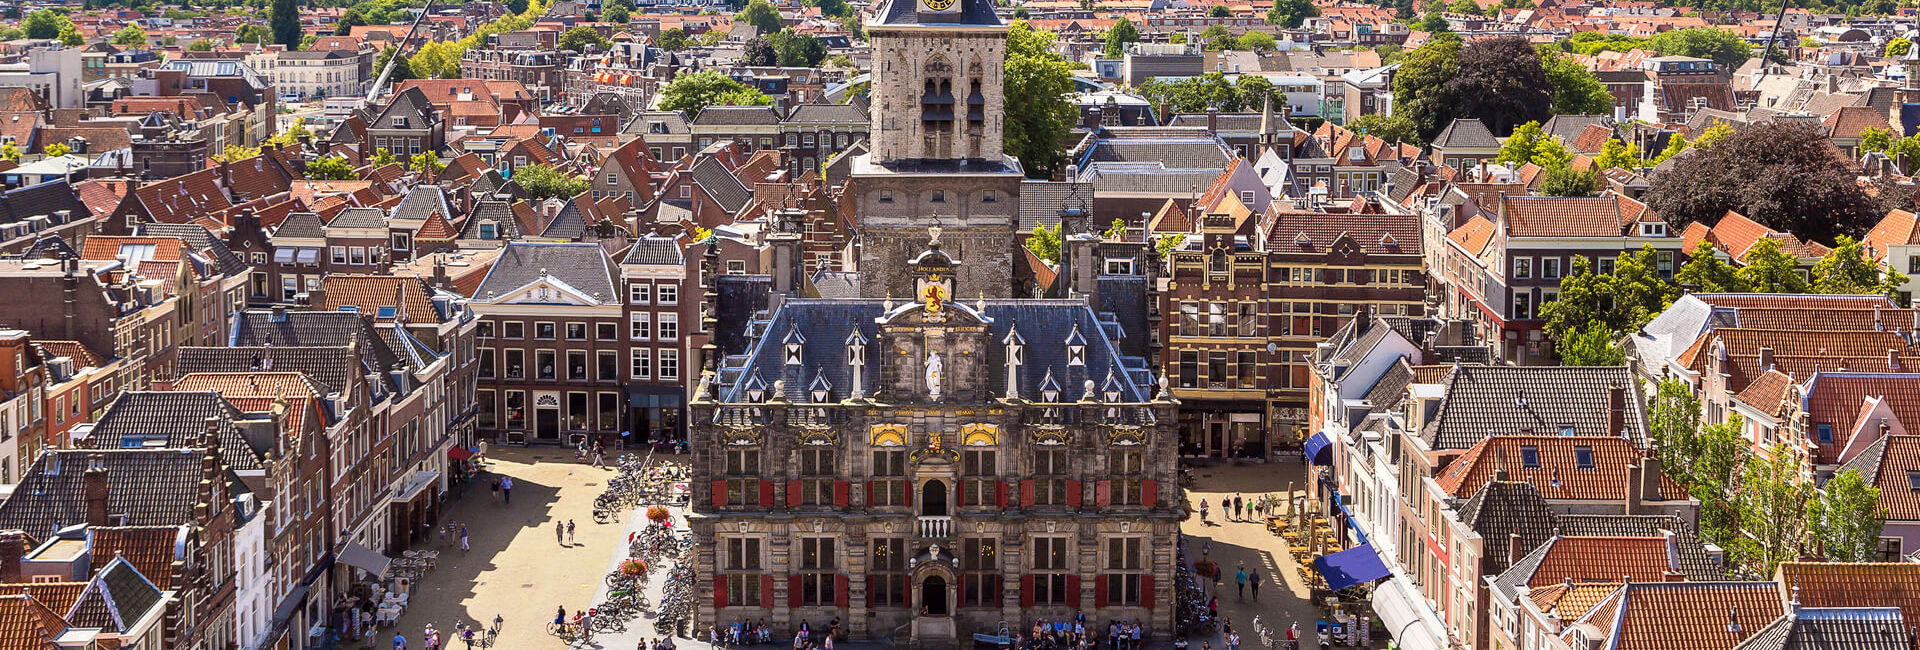 Town Hall from the tower of The New Church Delft - Explore Delft - Gasterij 't Karrewiel